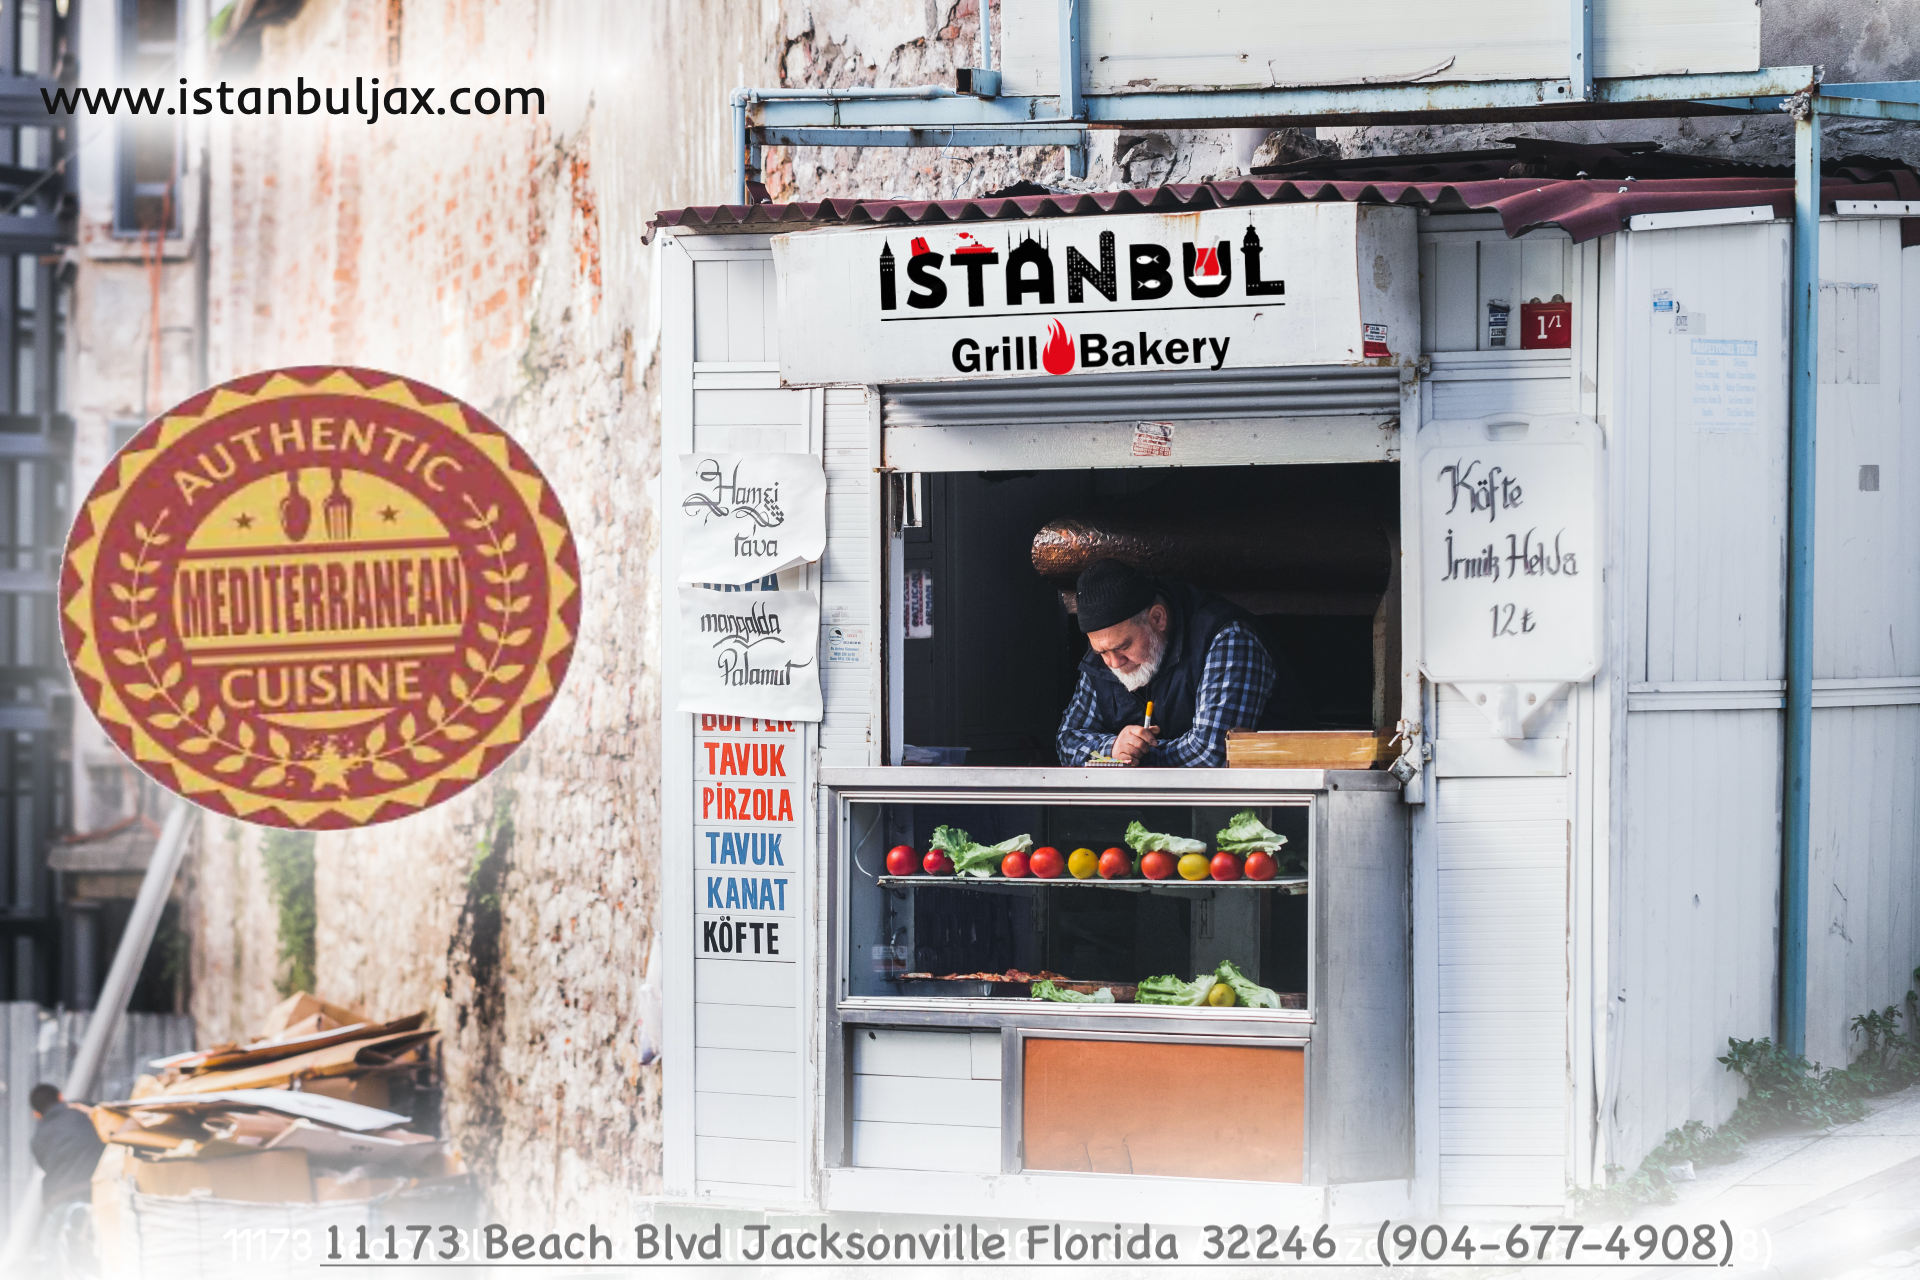 Istanbul Grill and Bakery